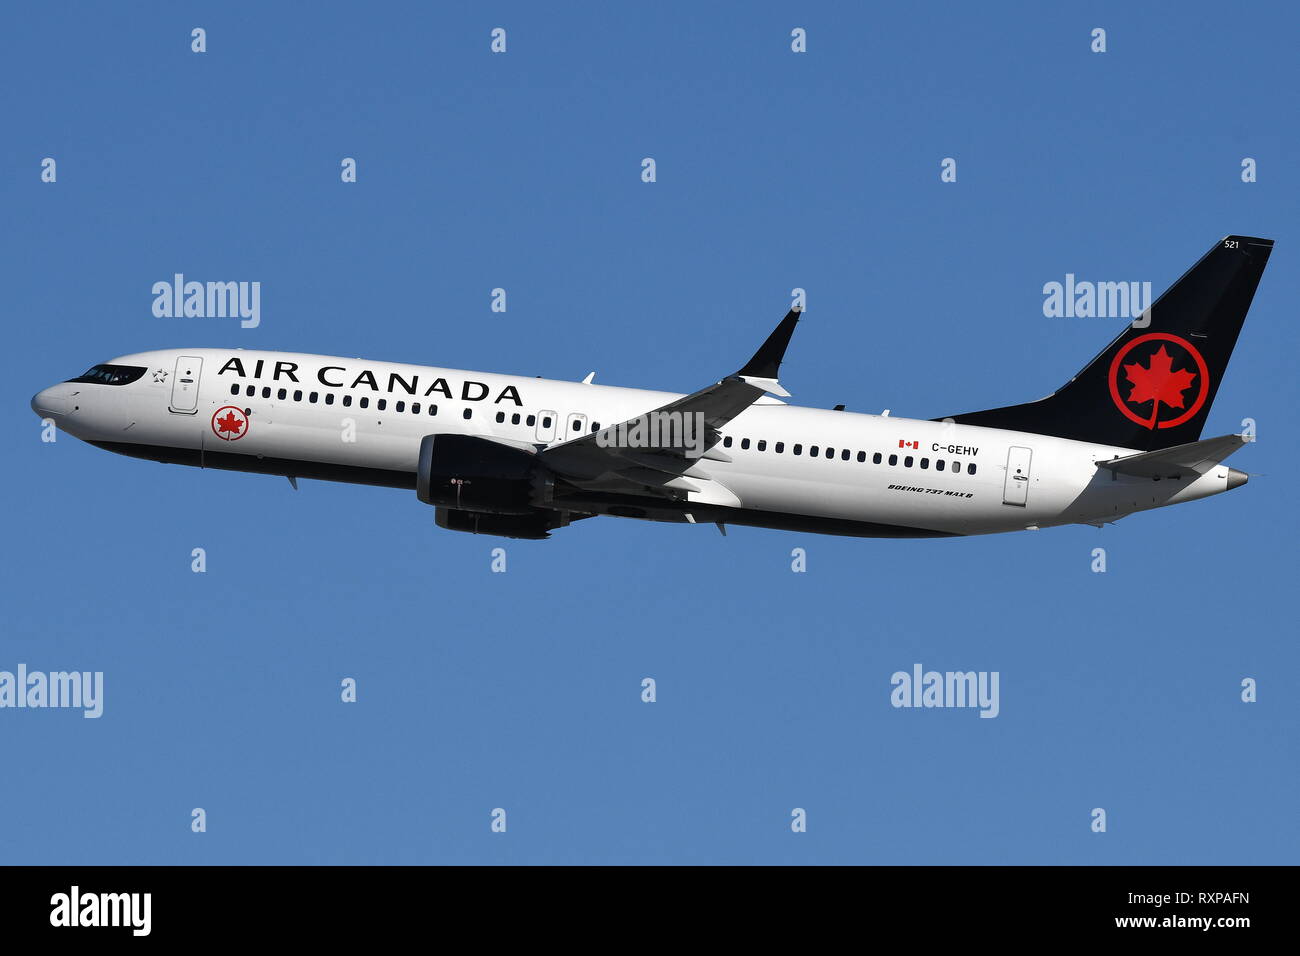 BOEING 737-MAX8 (C-GEHV) OF AIR CANADA Stock Photo